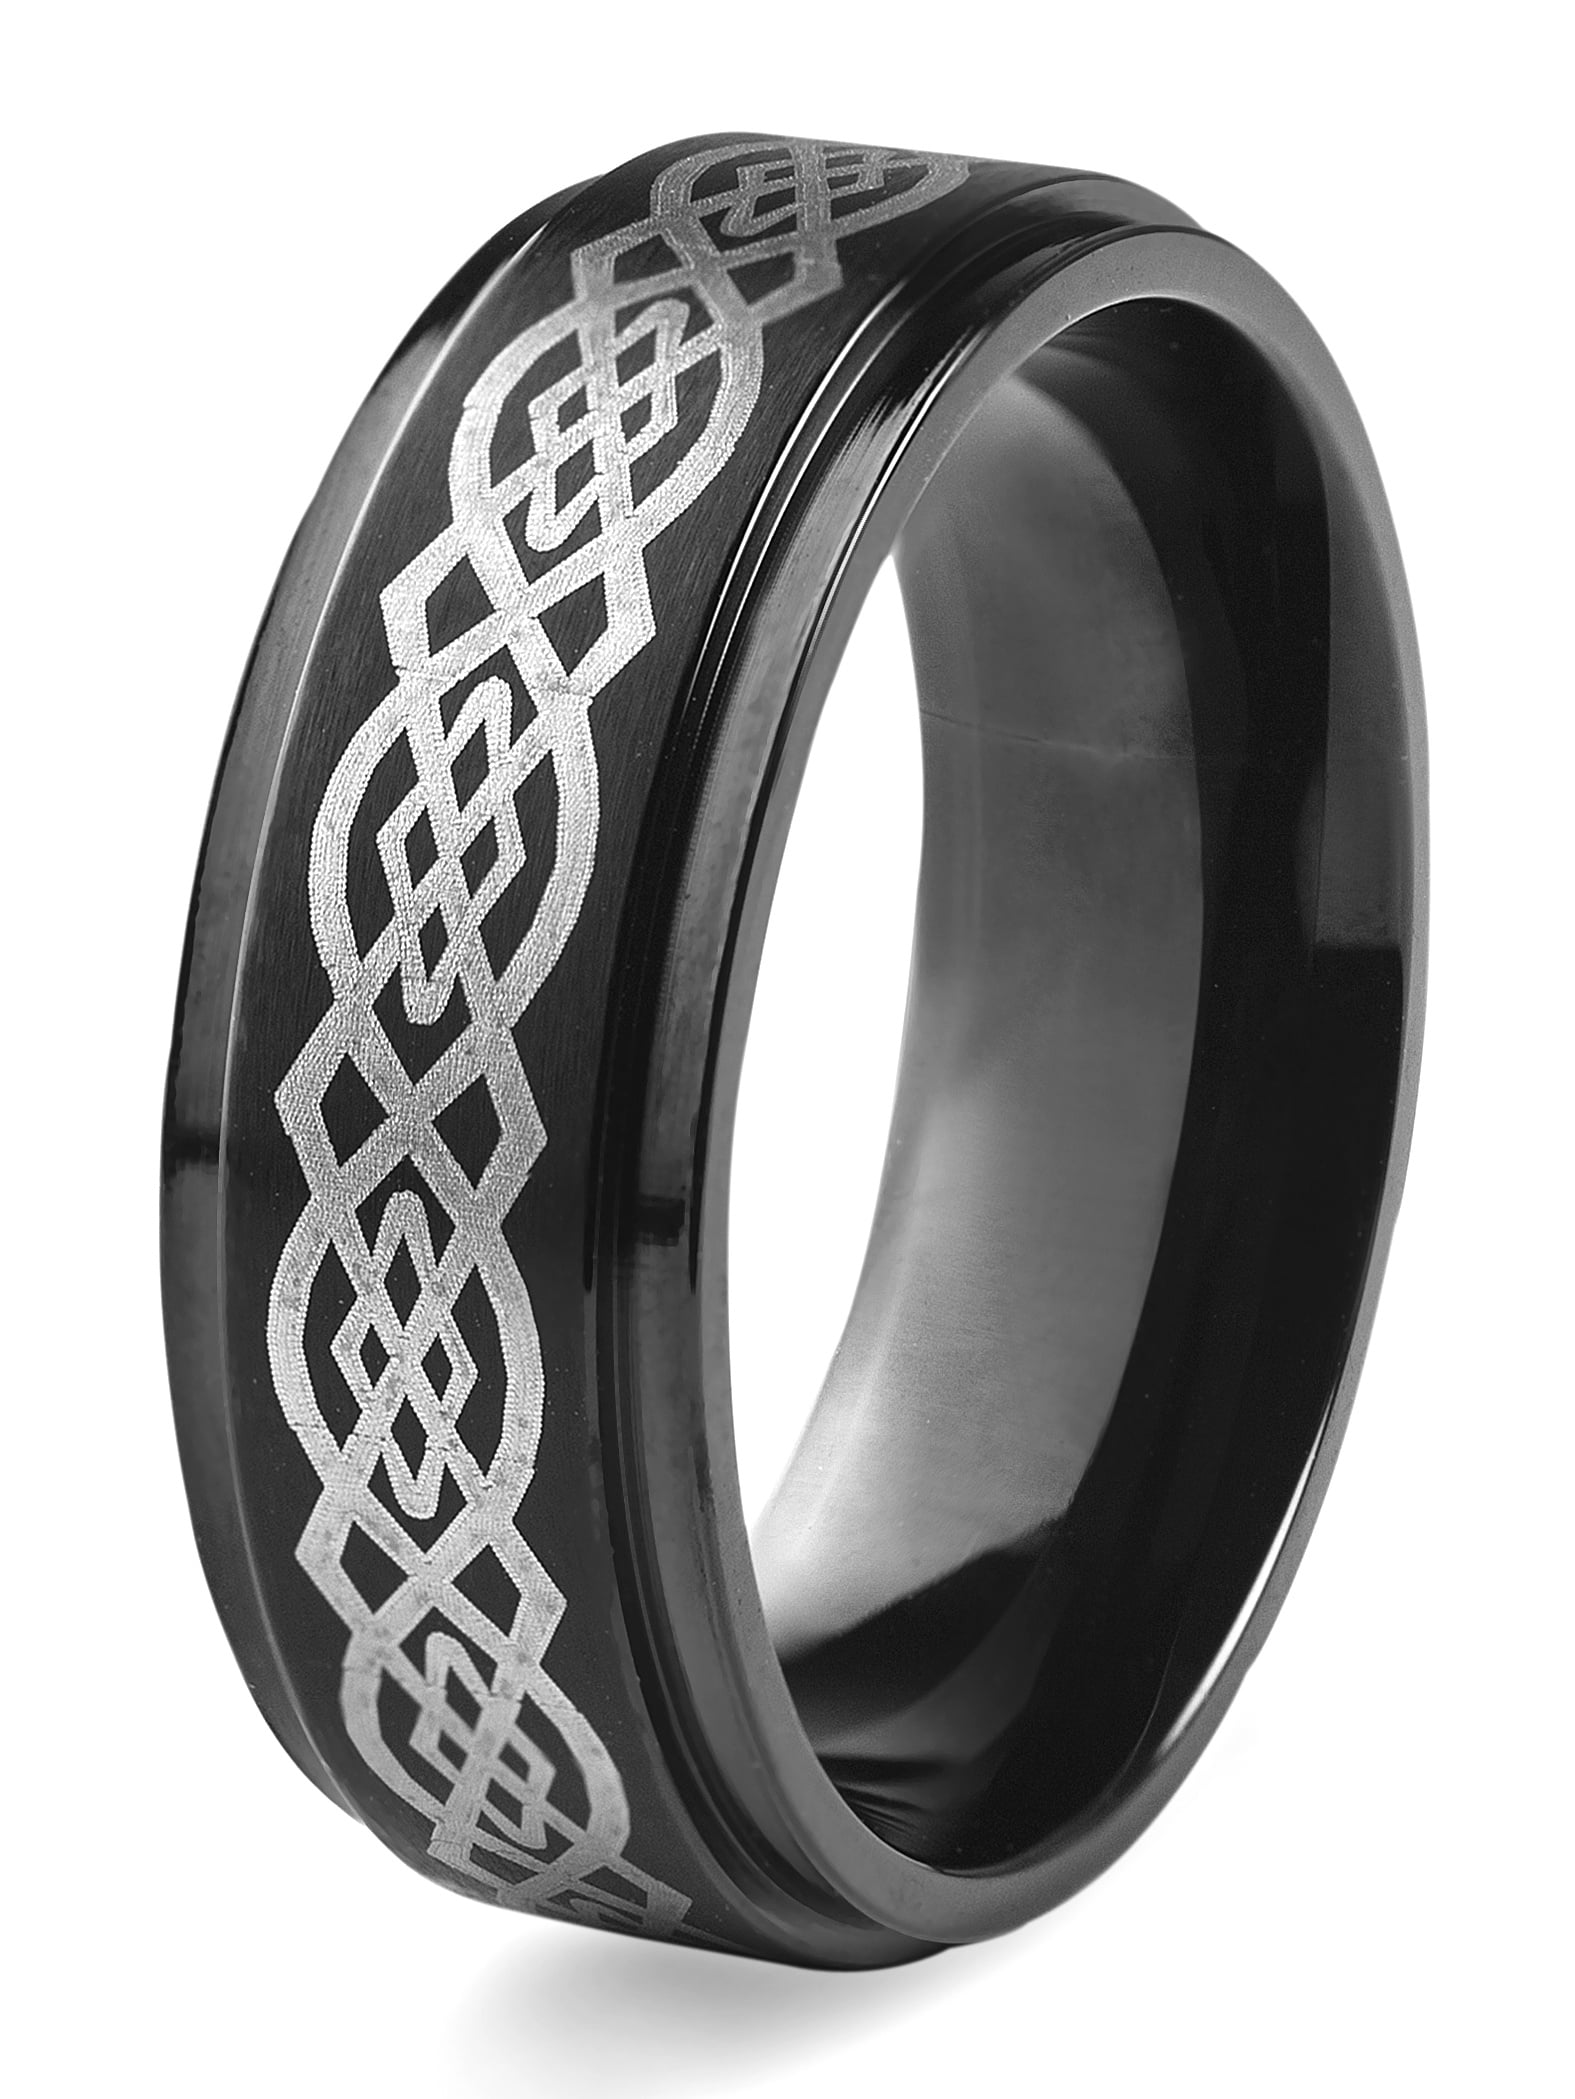 Centered Tribal Inlay Two Tone Black IP Band Men's Ring Stainless Steel 